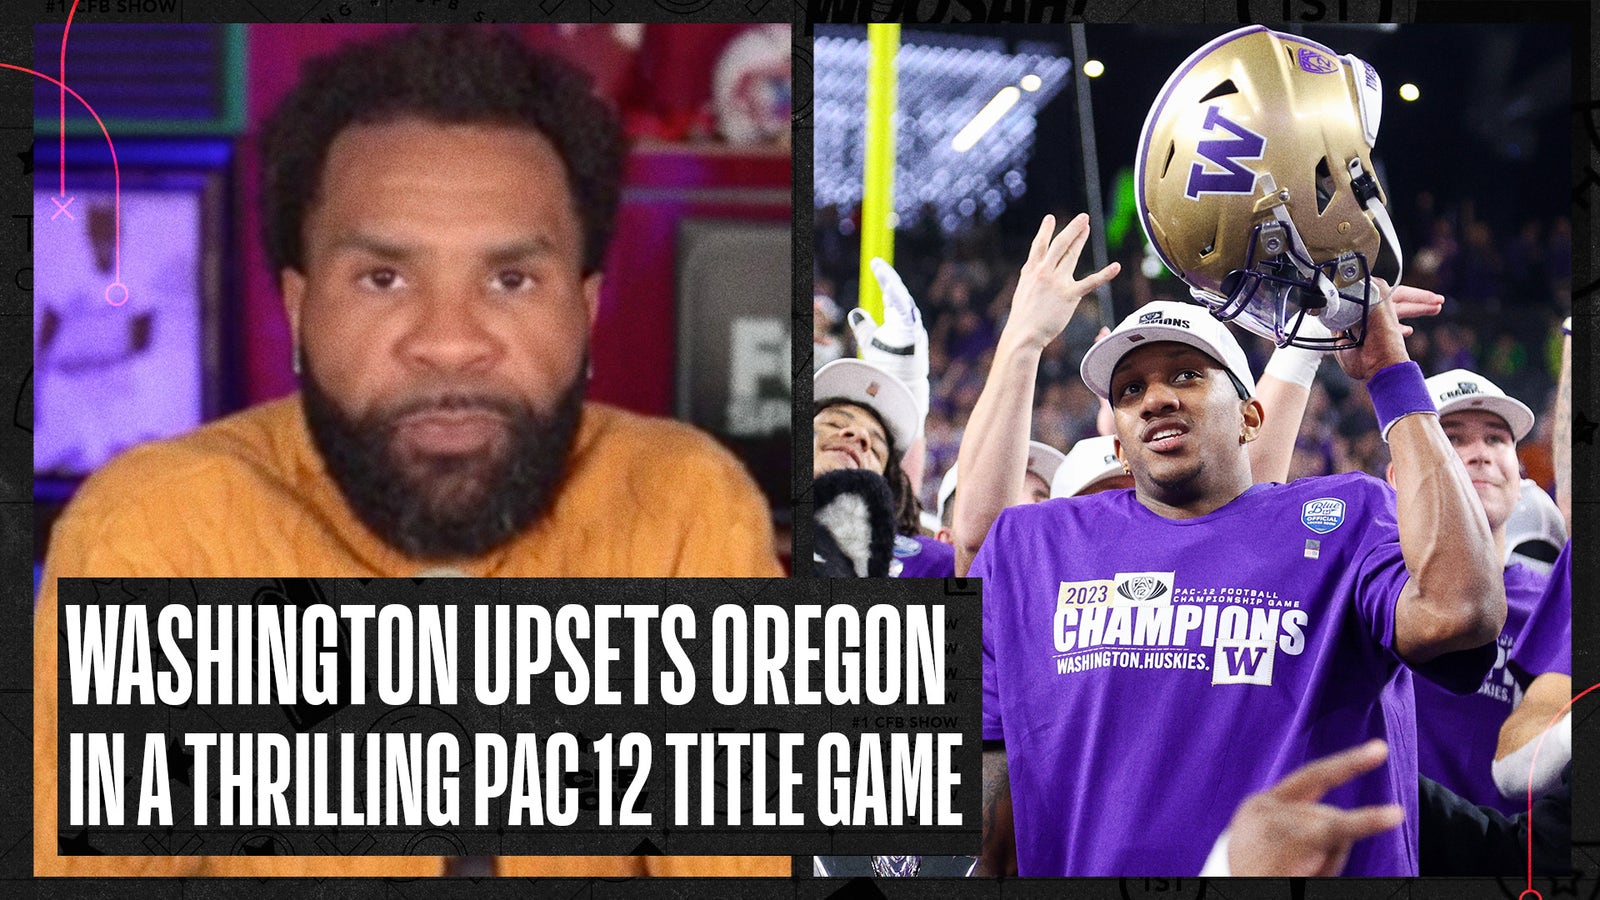 No. 3 Washington upsets No. 5 Oregon in a thrilling Pac-12 title game